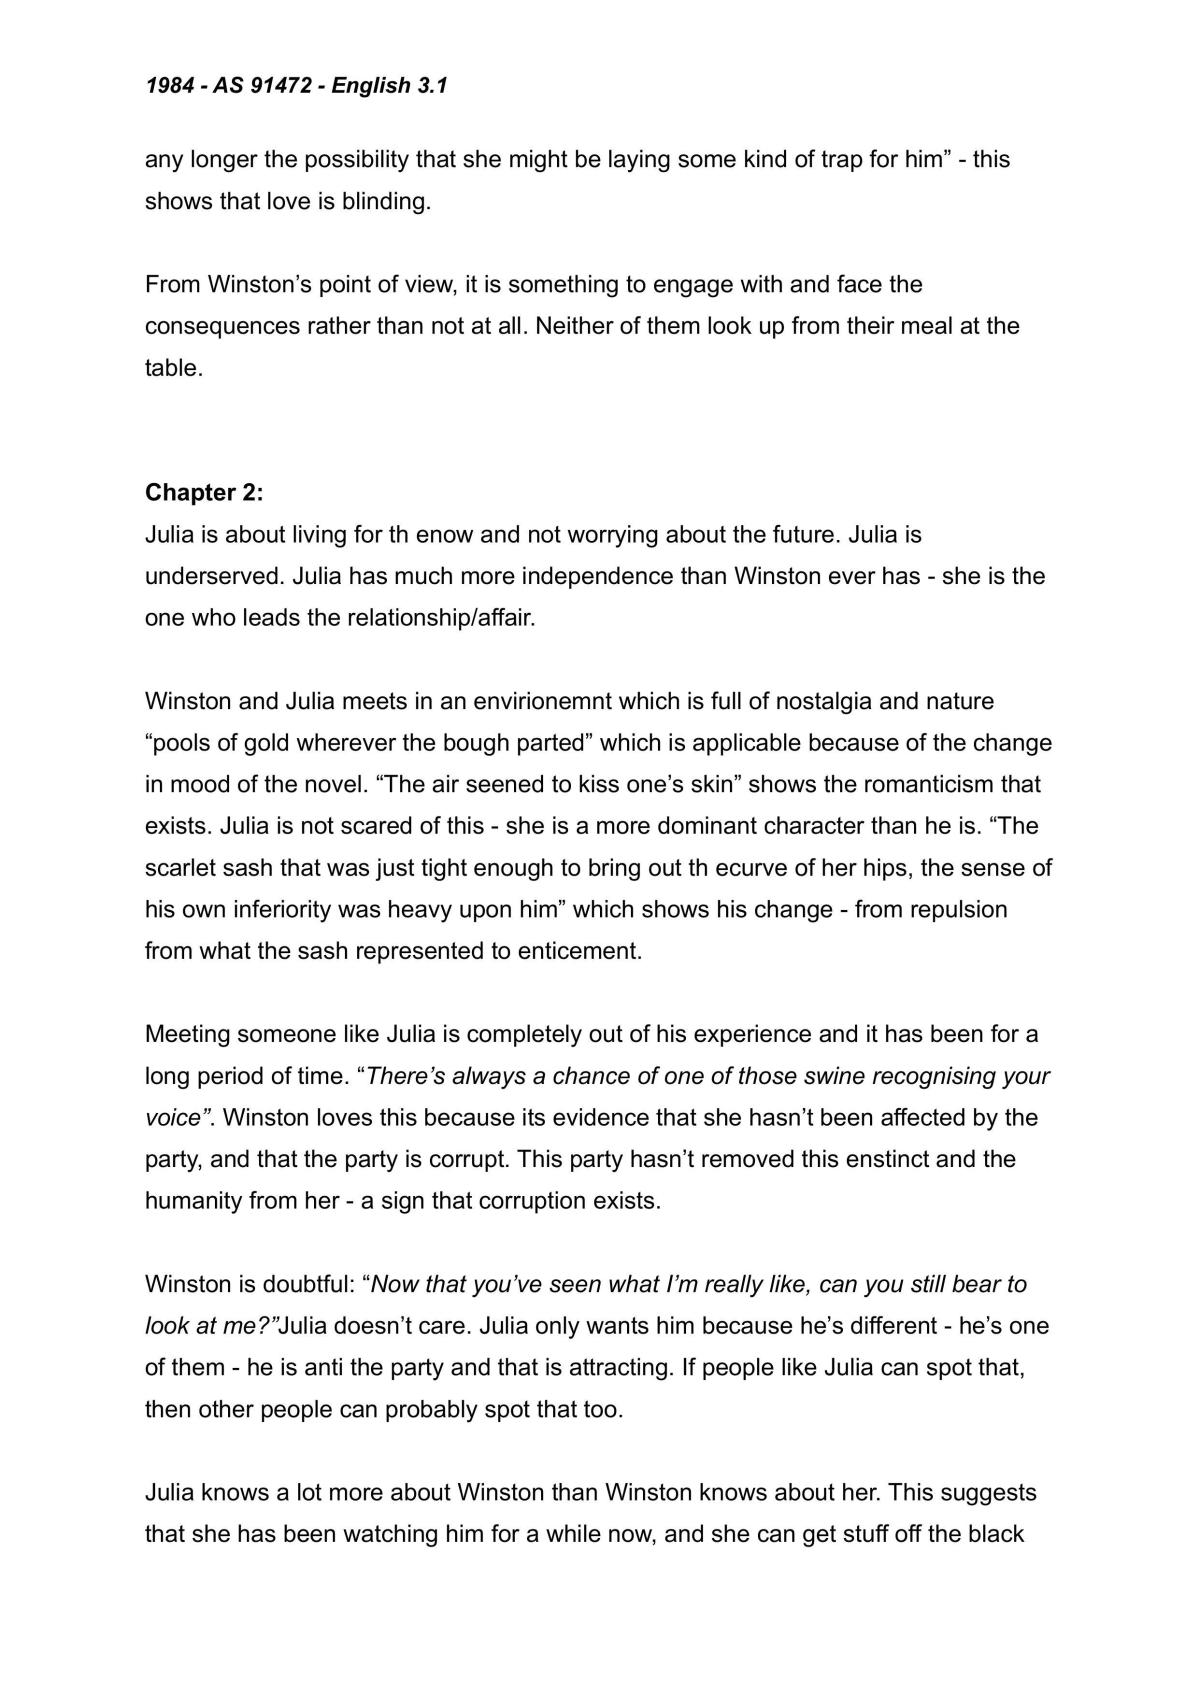 English 3.1: Full notes for the text: 1984 - Page 15